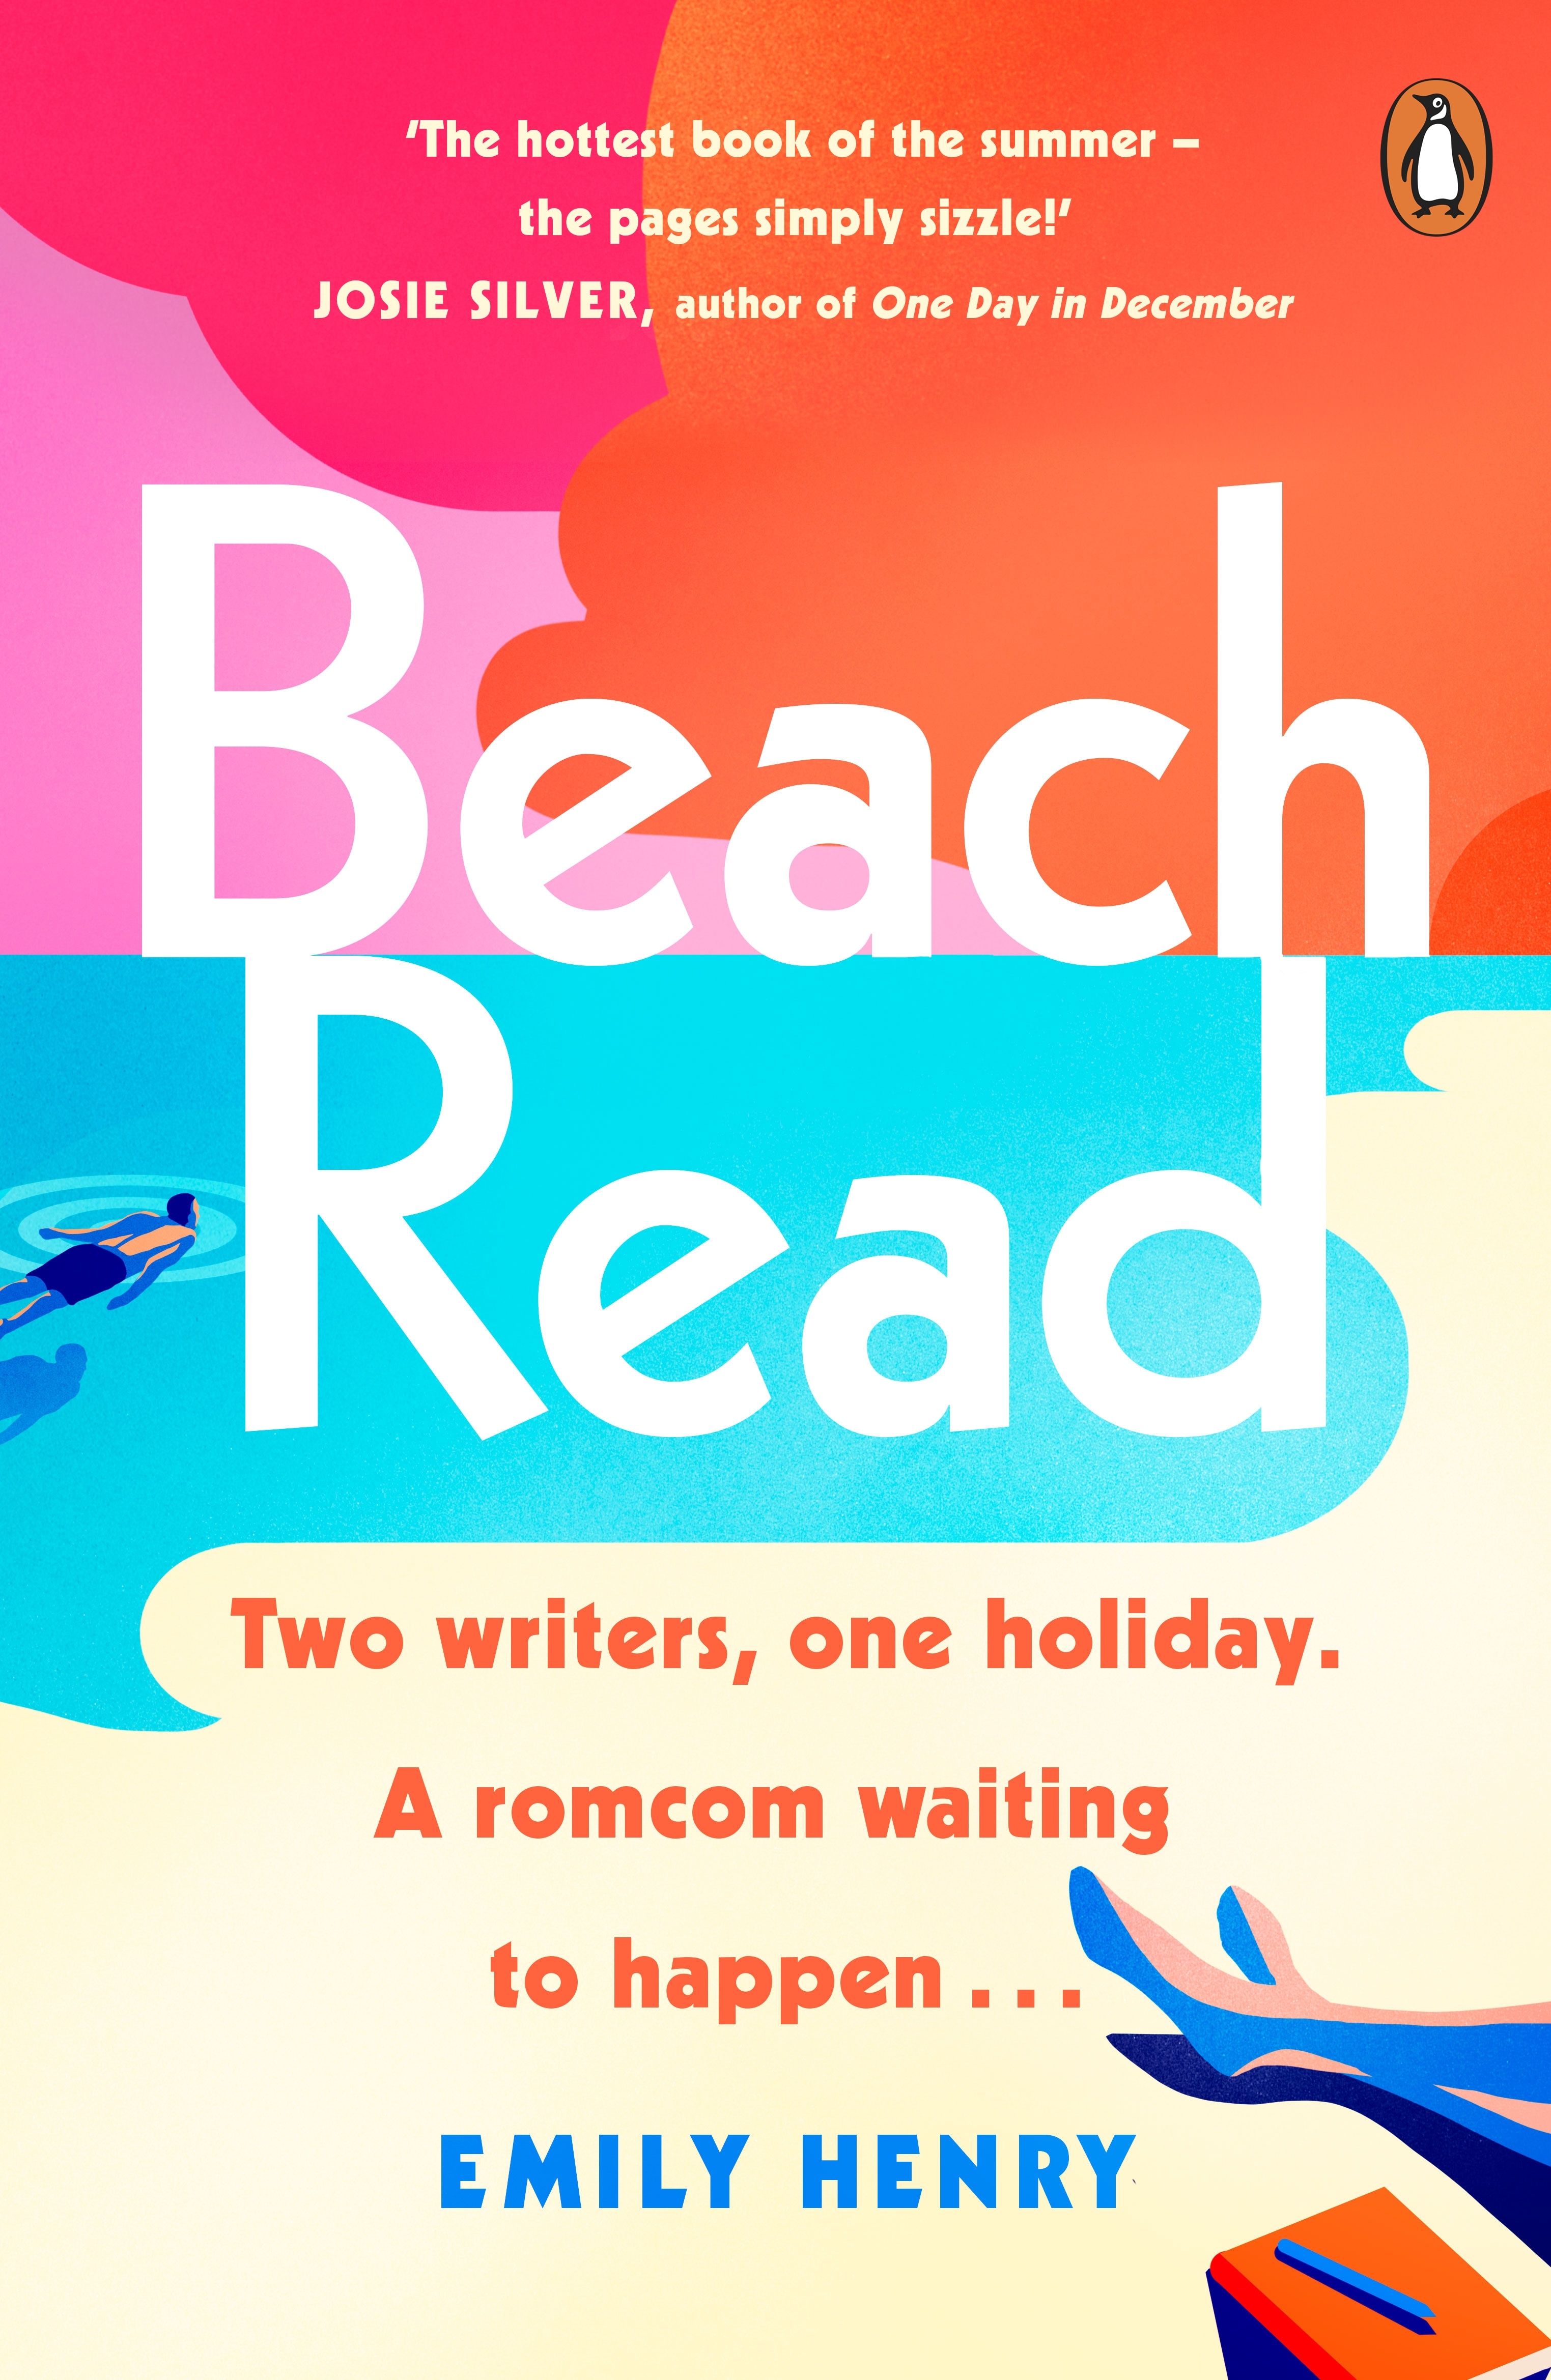 Book “Beach Read” by Emily Henry — August 20, 2020